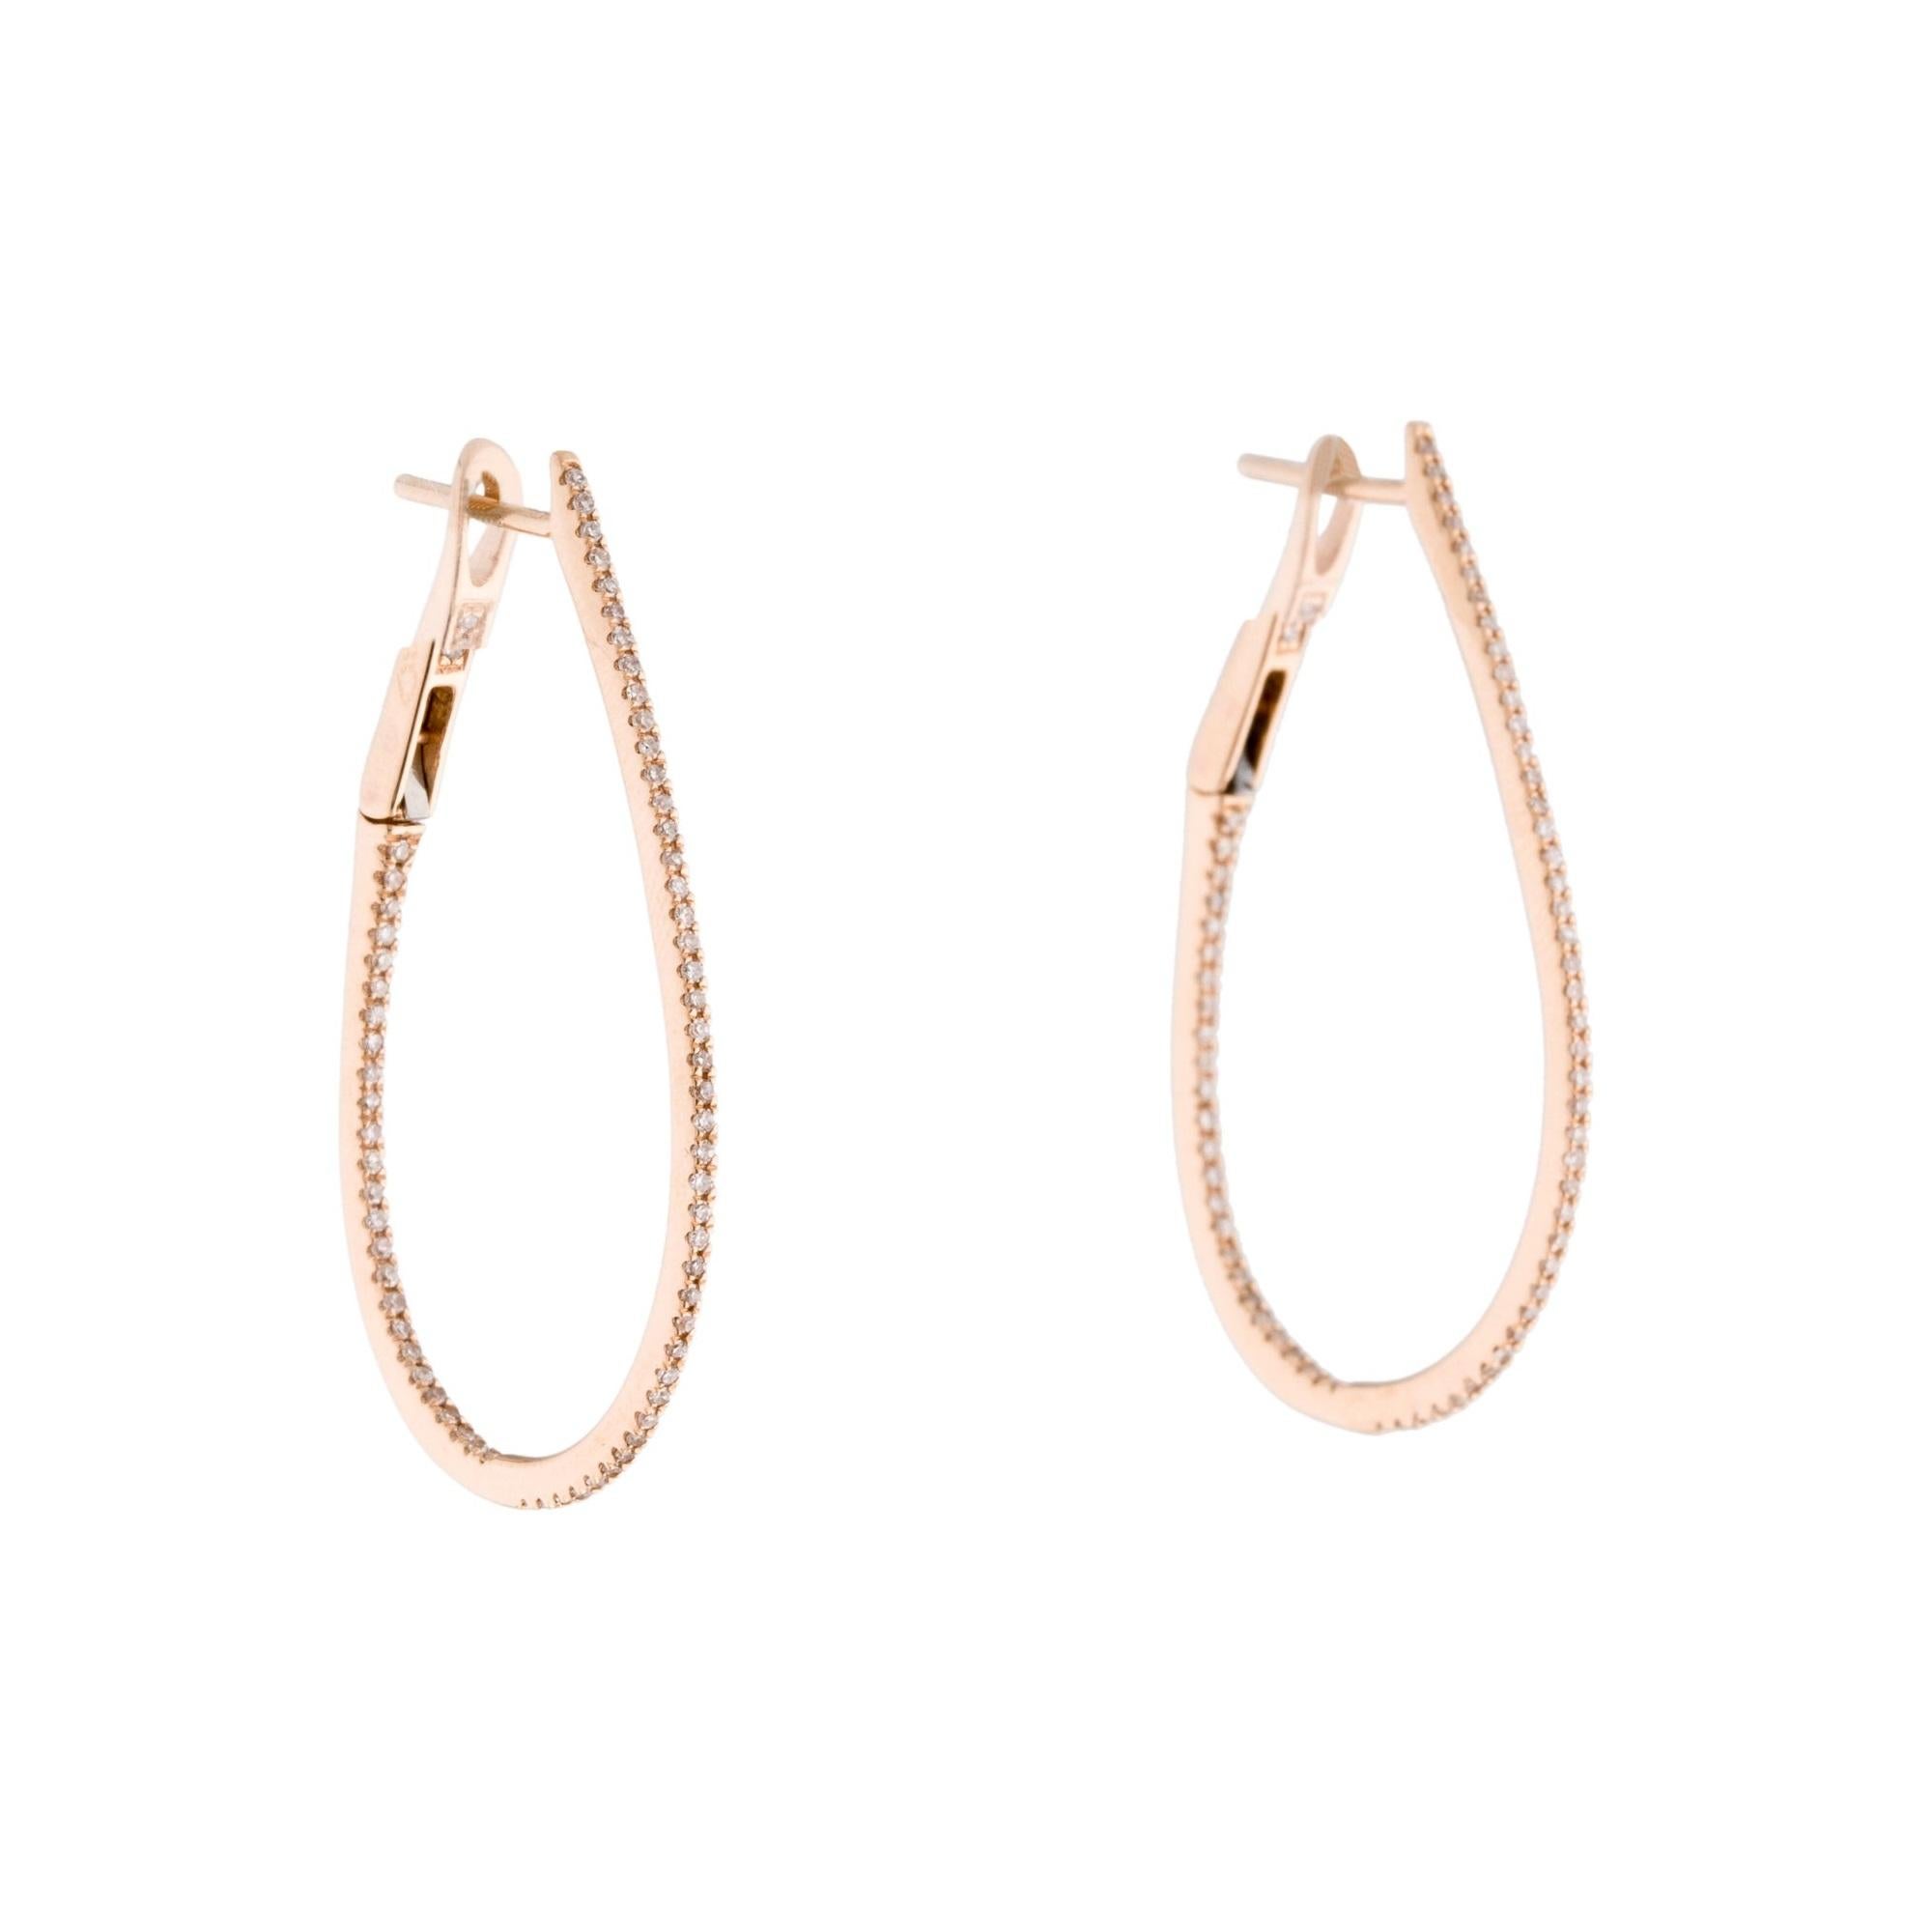 Set your lobes aglow in the classic shimmer and shine of these luxurious pear shape skinny hoop earrings! A dazzling array of diamonds fire up and down the design crafted from 14k white, yellow or rose gold. Lever backs offer easy application so you